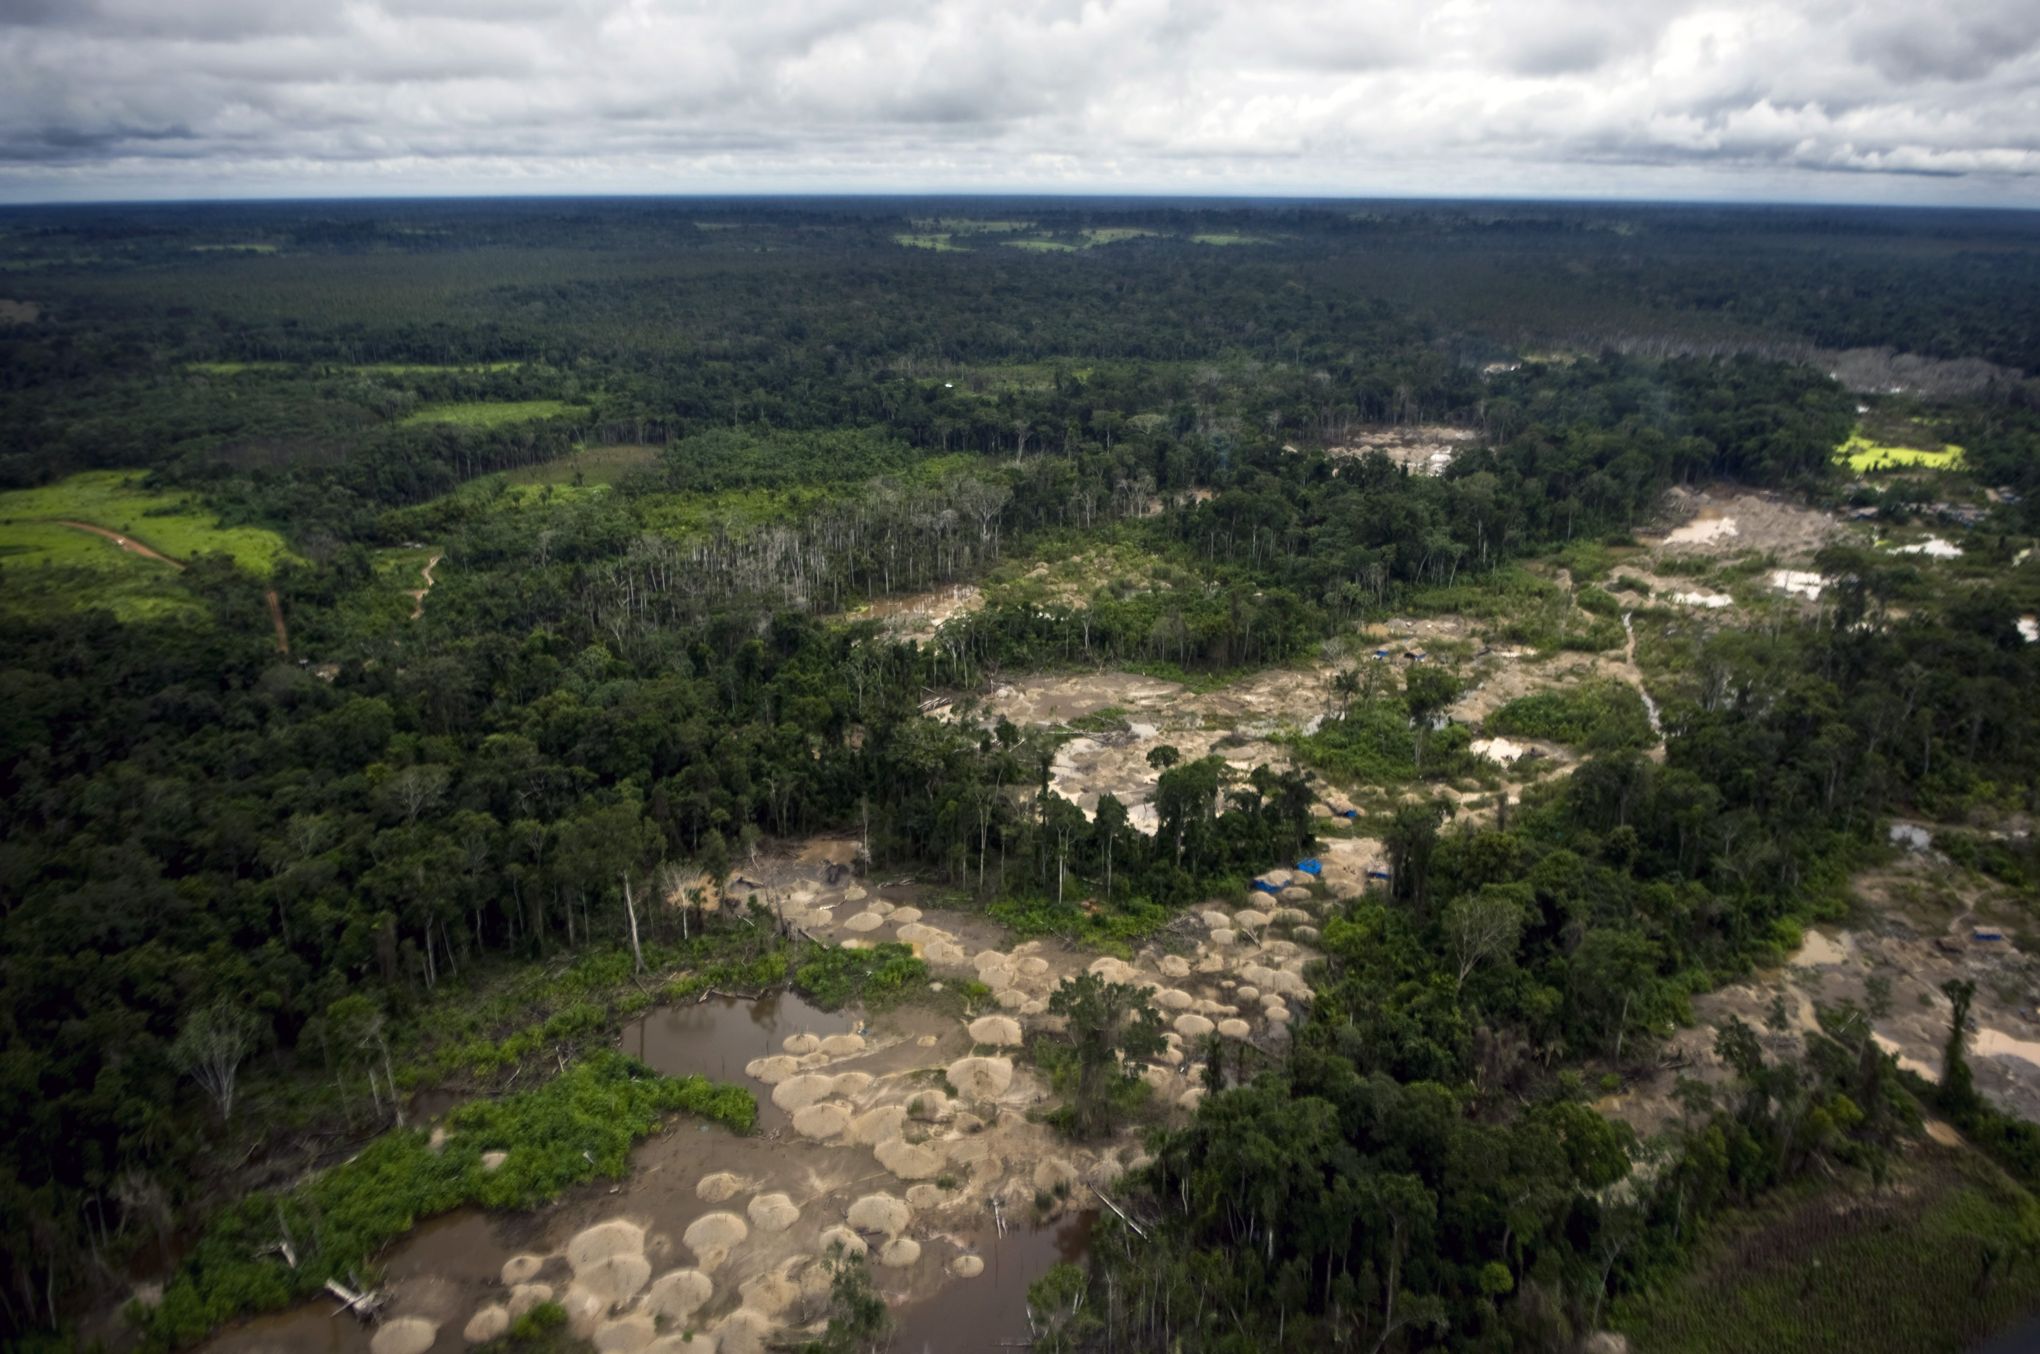 000 Hectares of Land in the Peruvian Amazon and neutralizes emissions